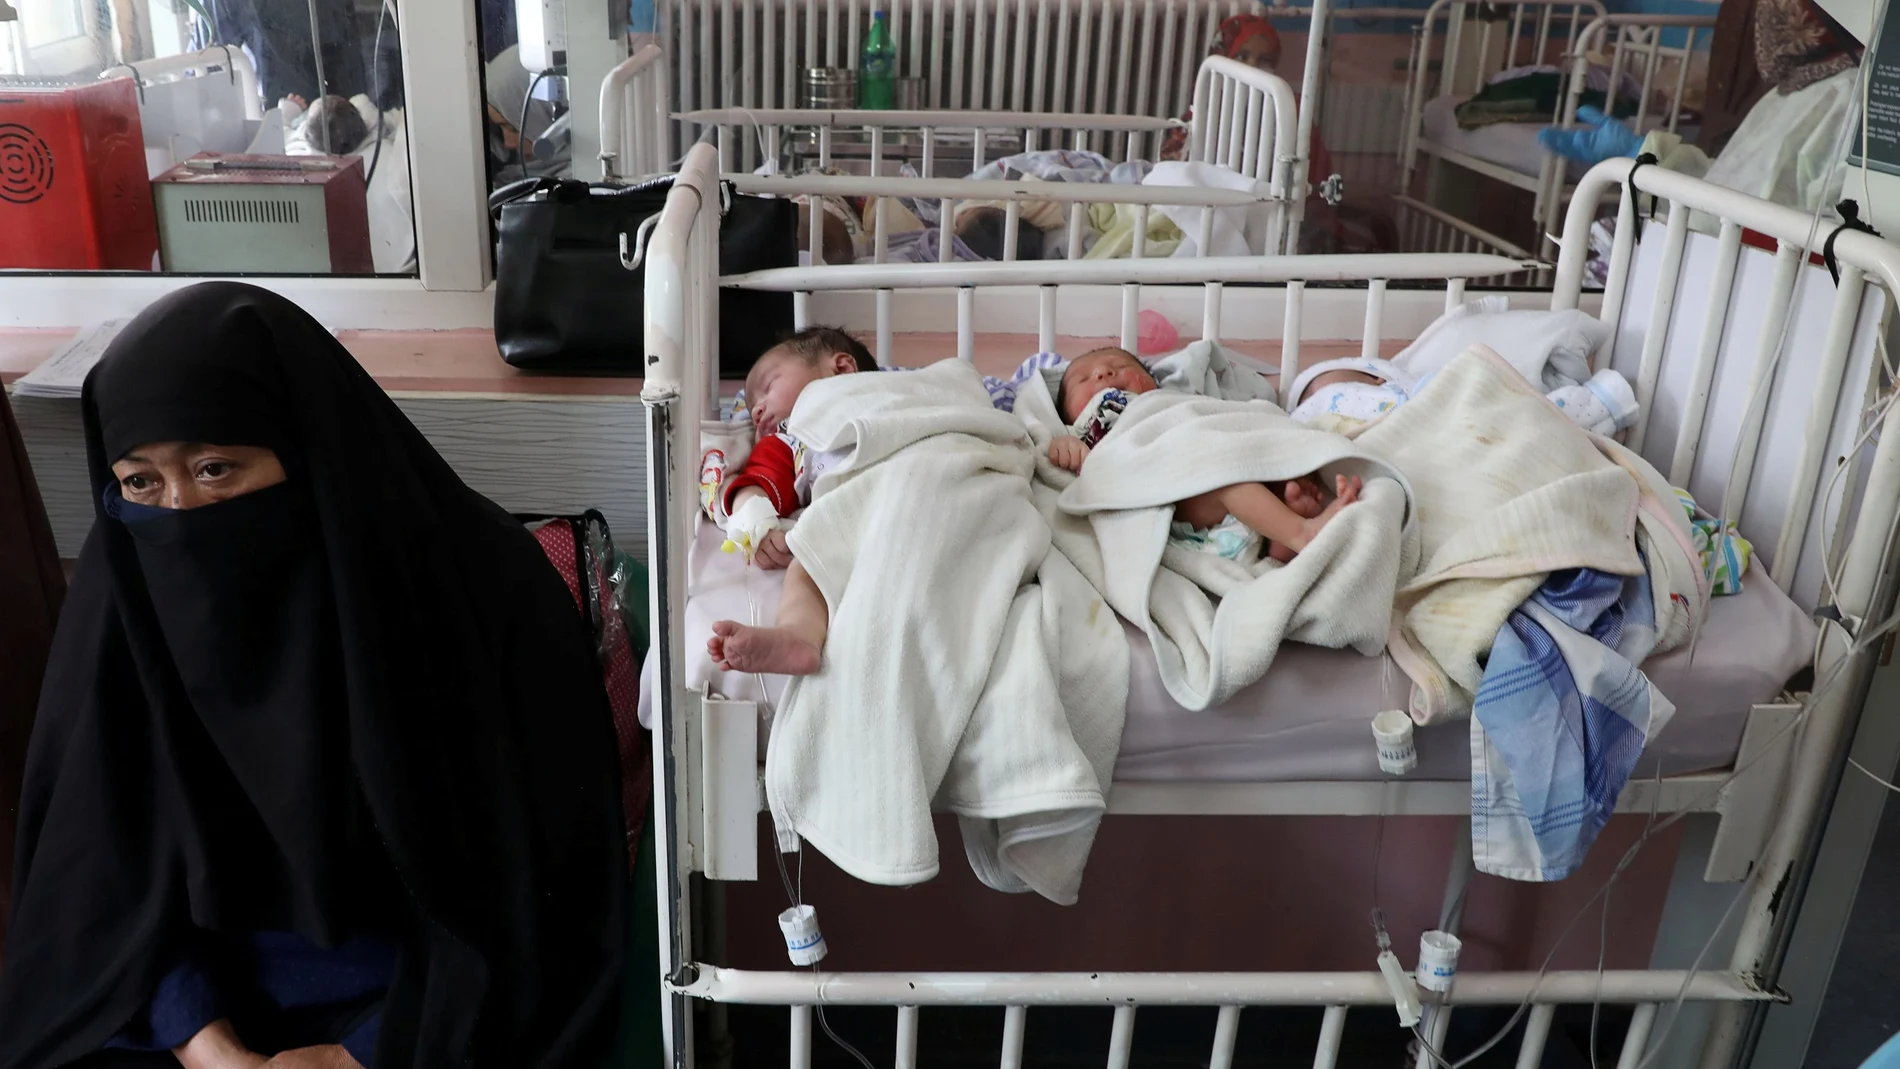 Newborn children who lost their mothers during the yesterday's attack lie on a bed at a hospital, in Kabul